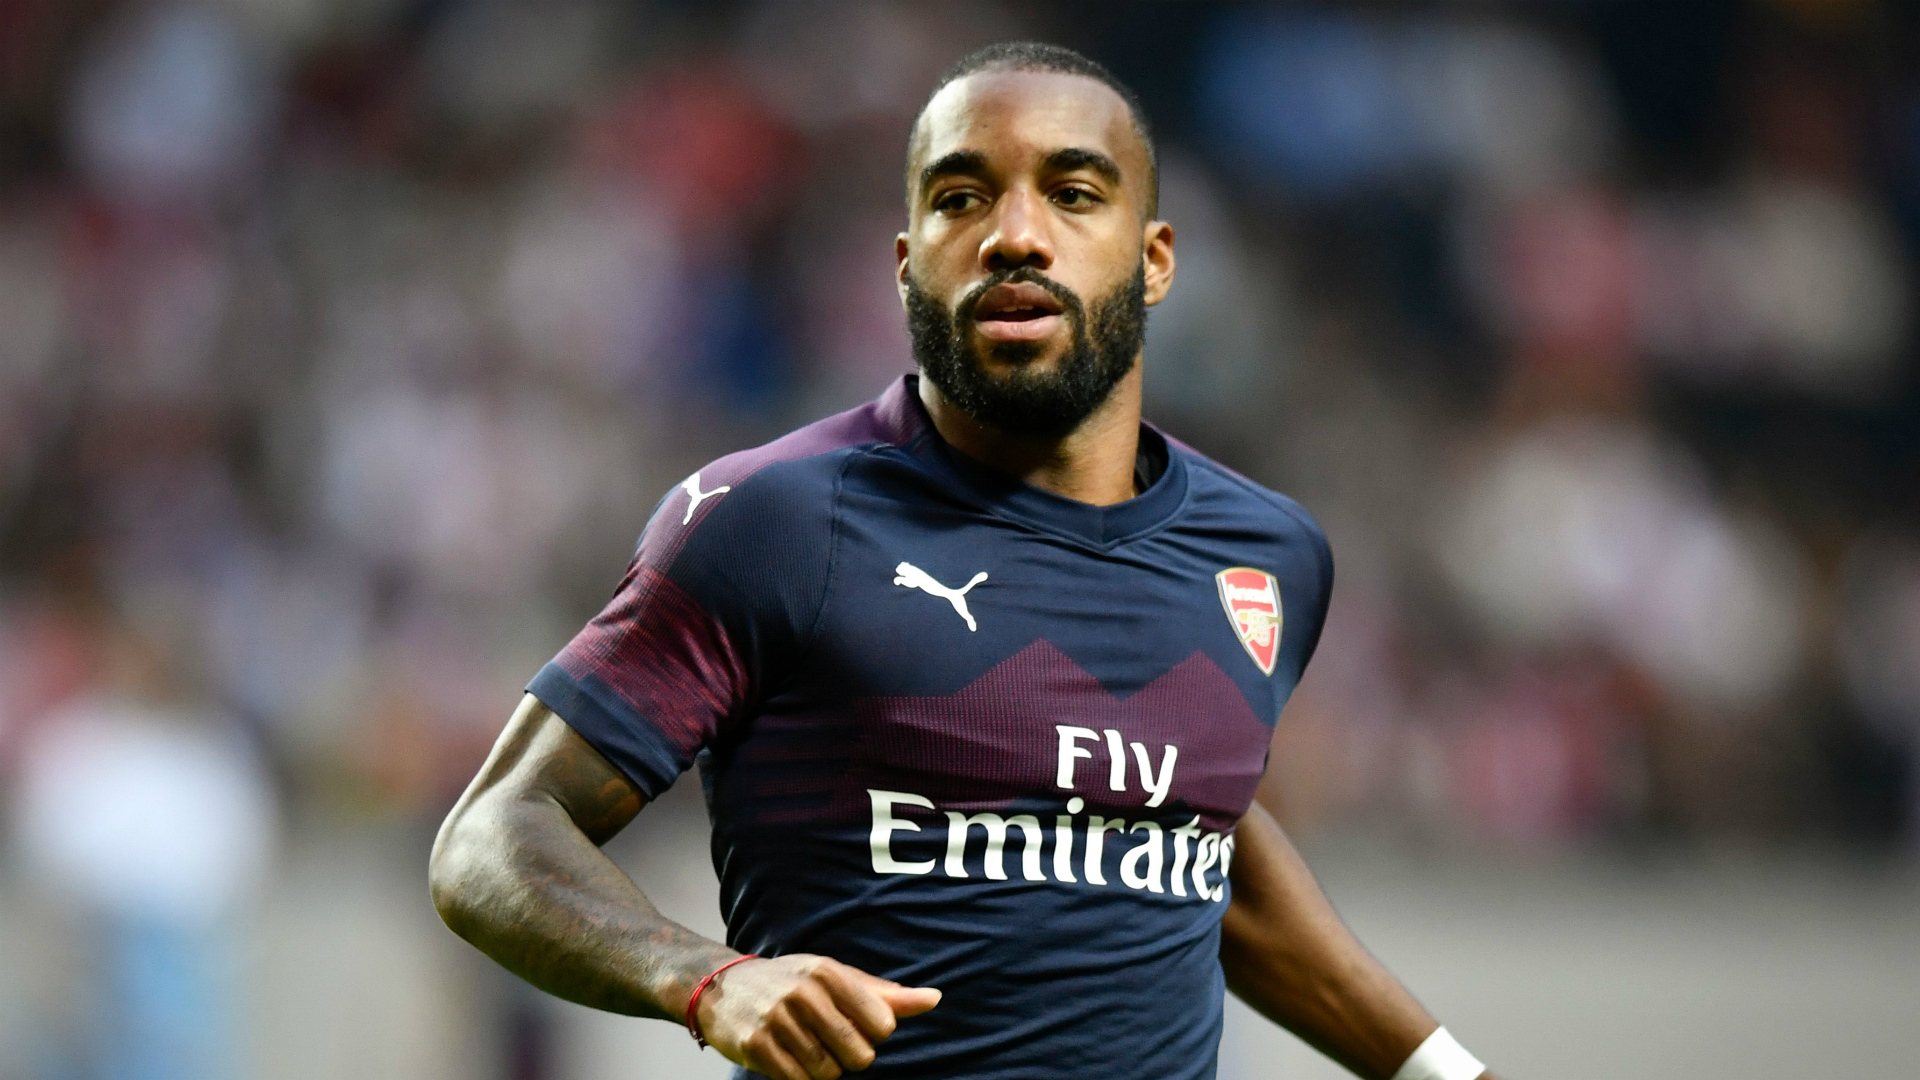 Transfer news and rumours LIVE: Lacazette considers Arsenal exit | Goal.com1920 x 1080